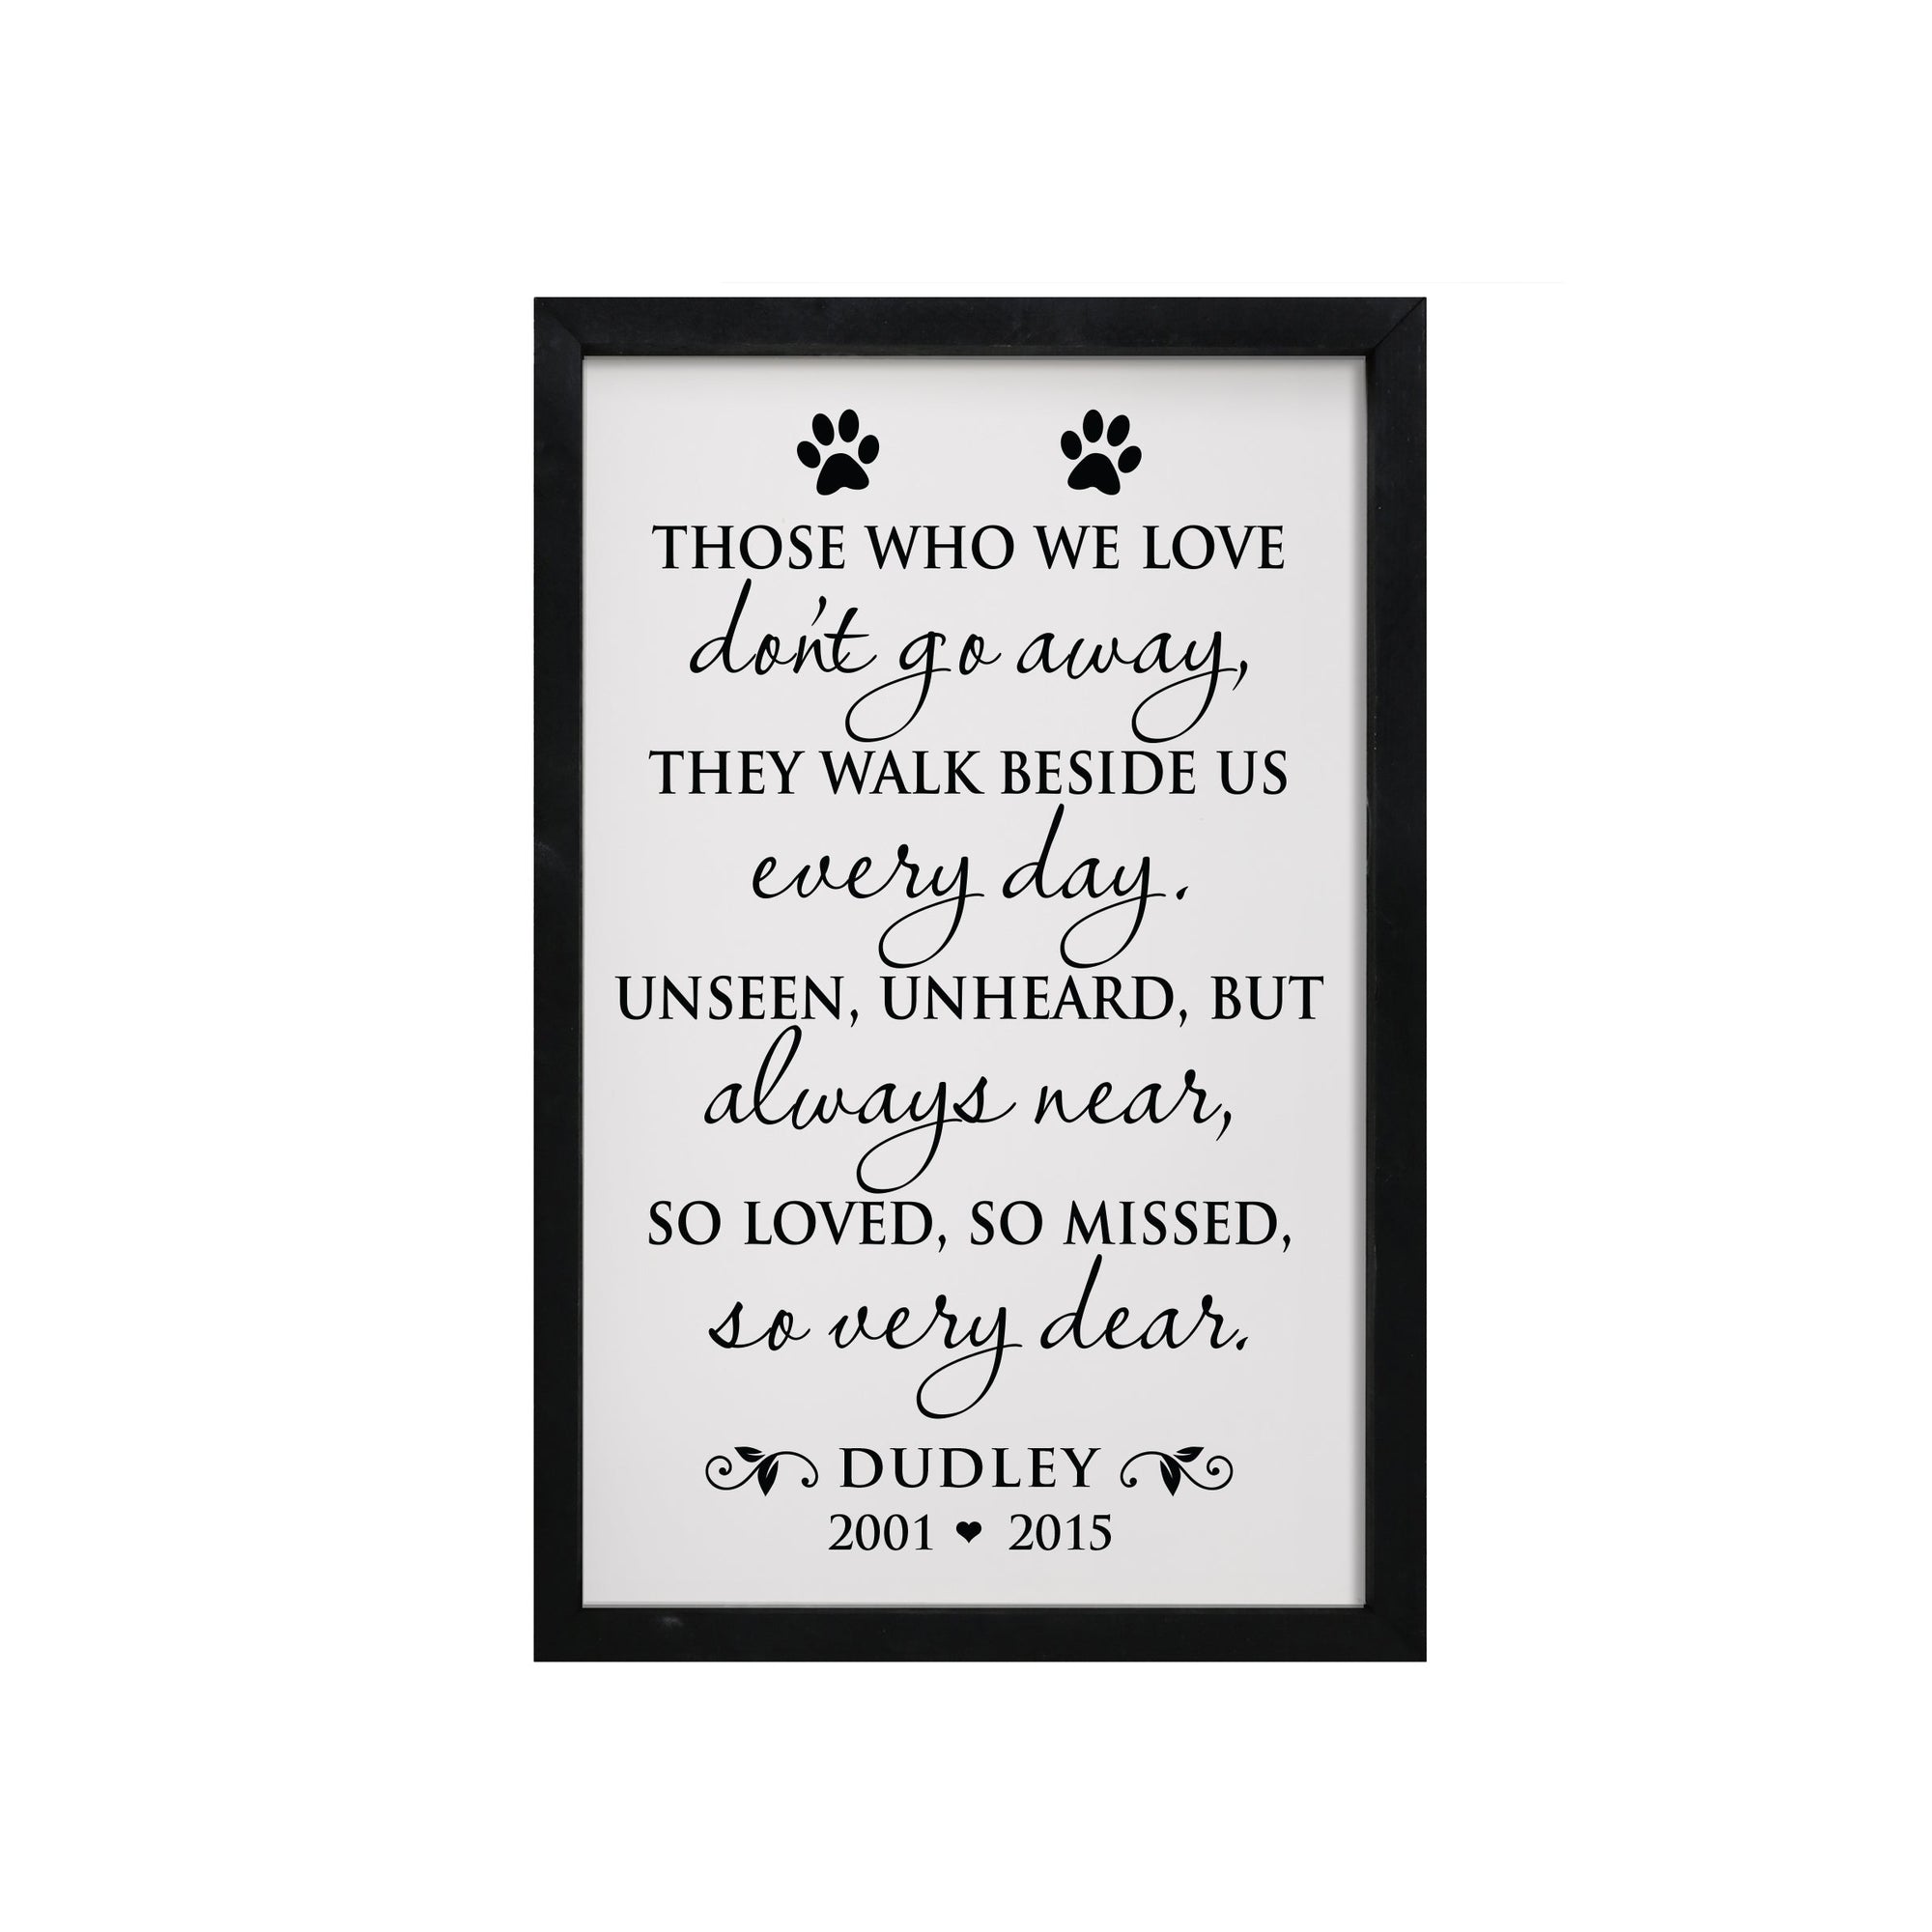 10x7 Black Framed Pet Memorial Shadow Box with phrase "Those Who We Love Don't Go Away"